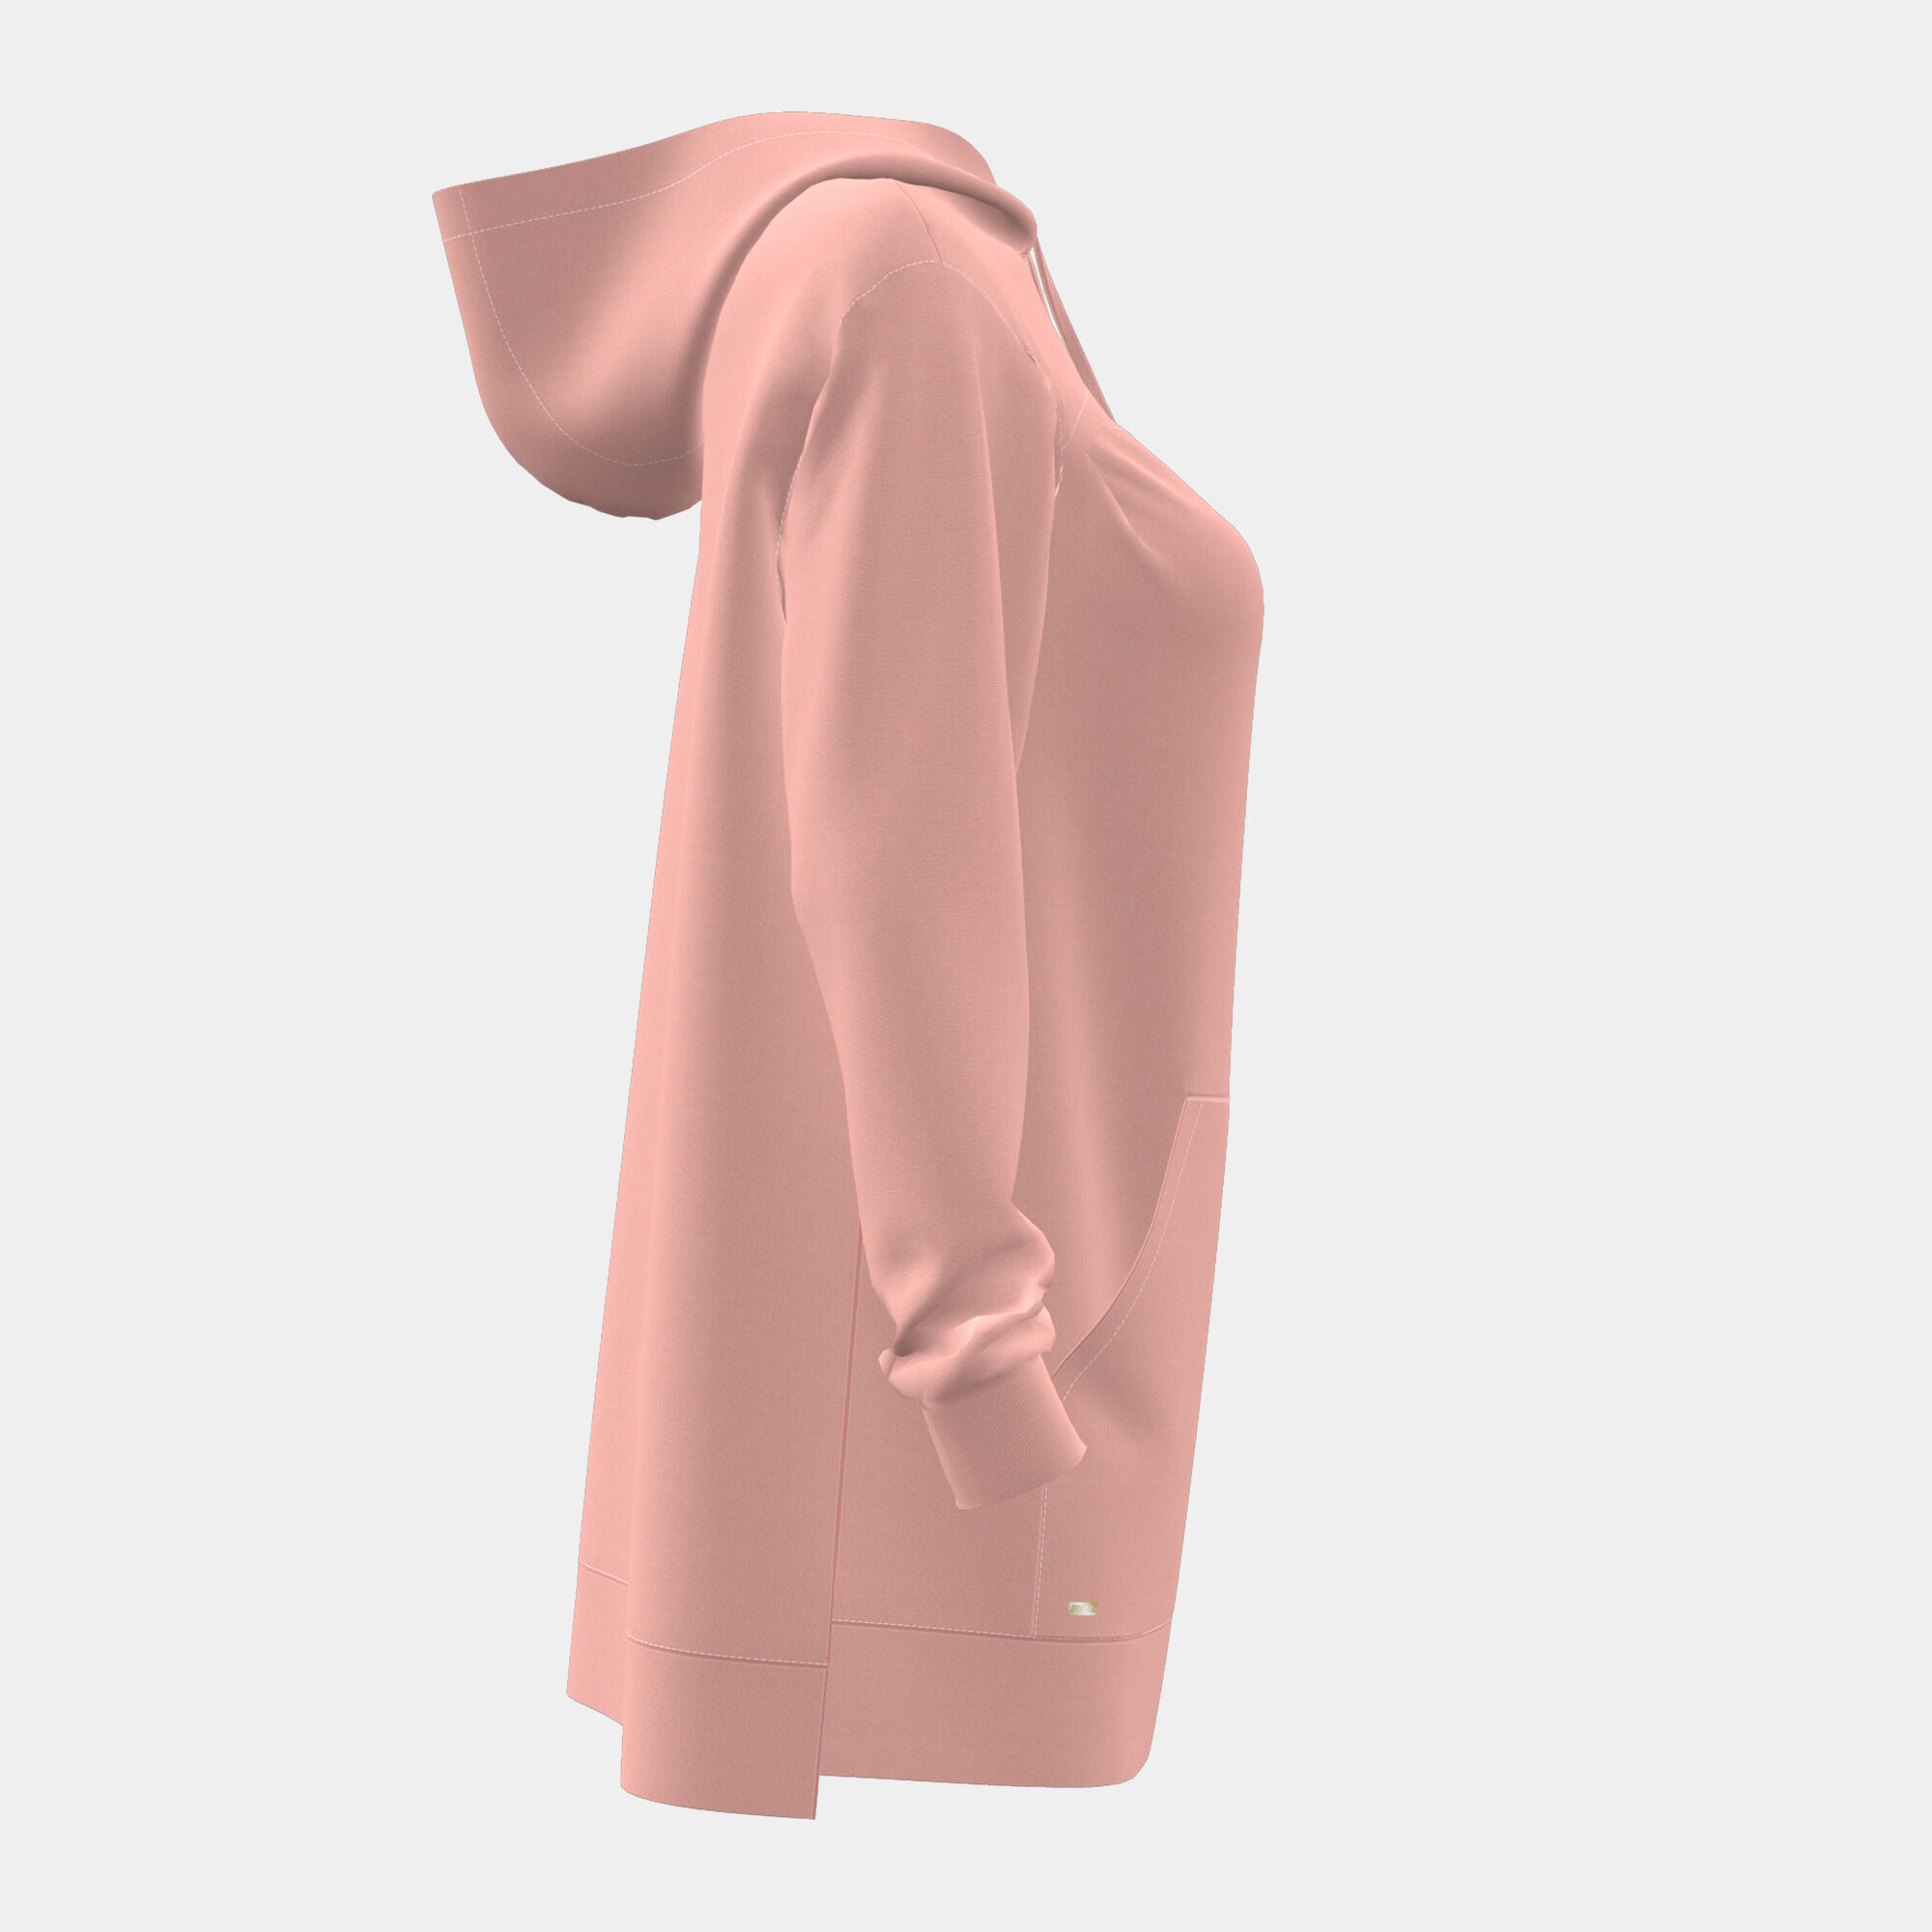 HOODED SWEATER WOMAN BREATH PINK